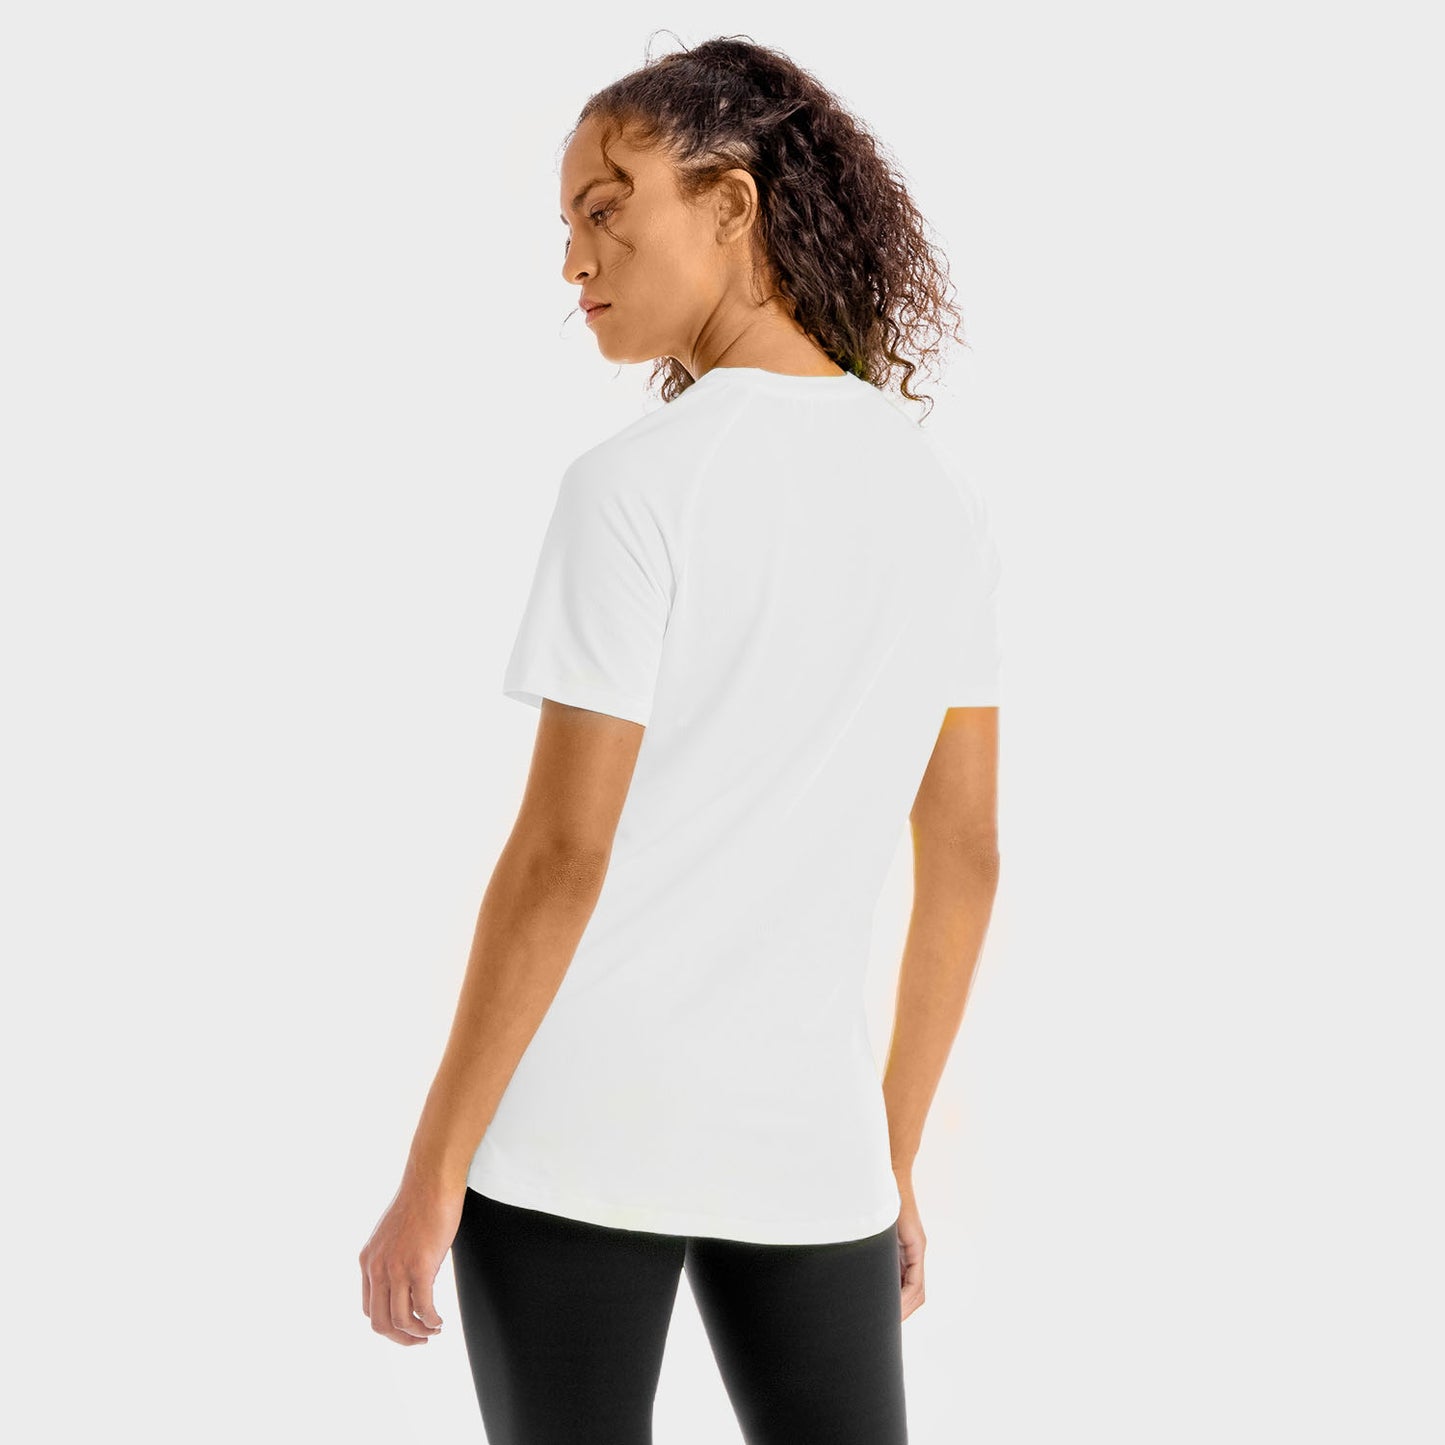 squatwolf-workout-clothes-core-mesh-tee-white-women-gym-t-shirts-for-women